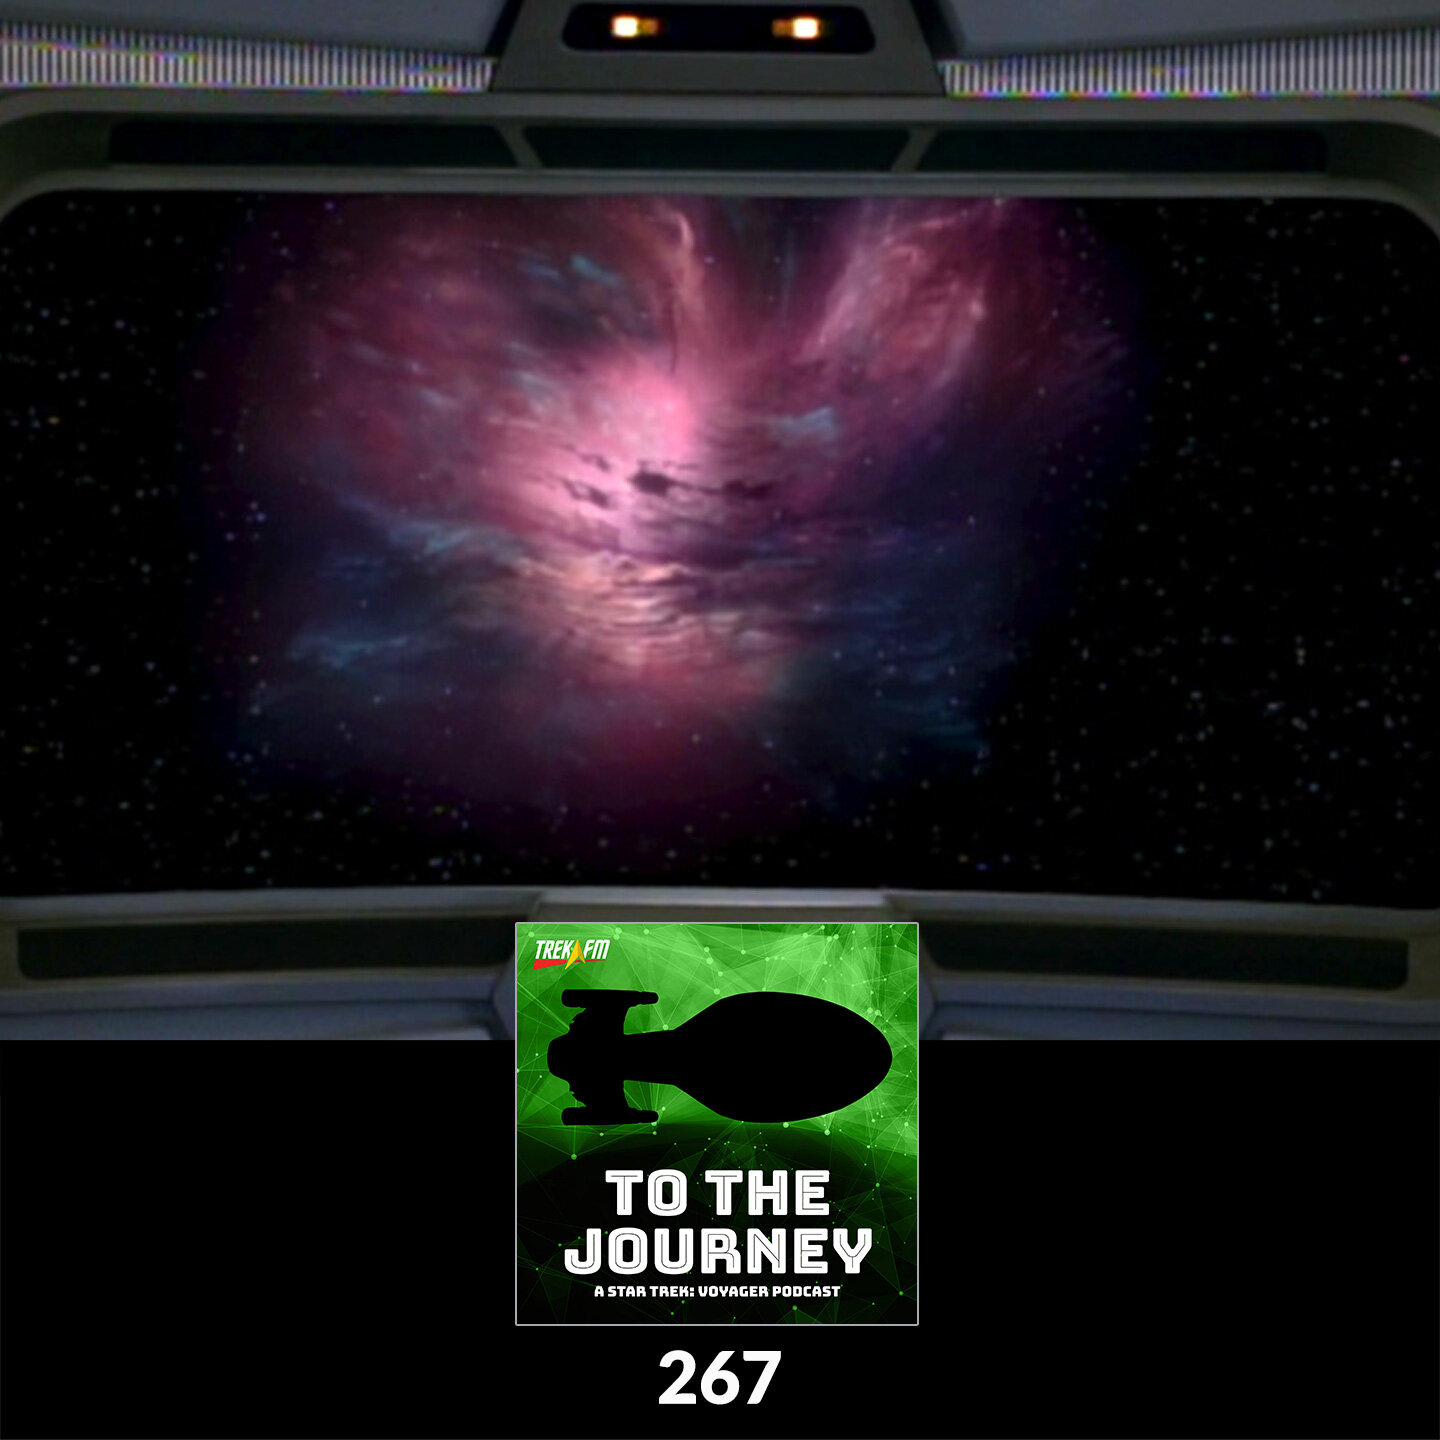 To The Journey 267: Voyager Rorschach Test  - Voyager Q&amp;A